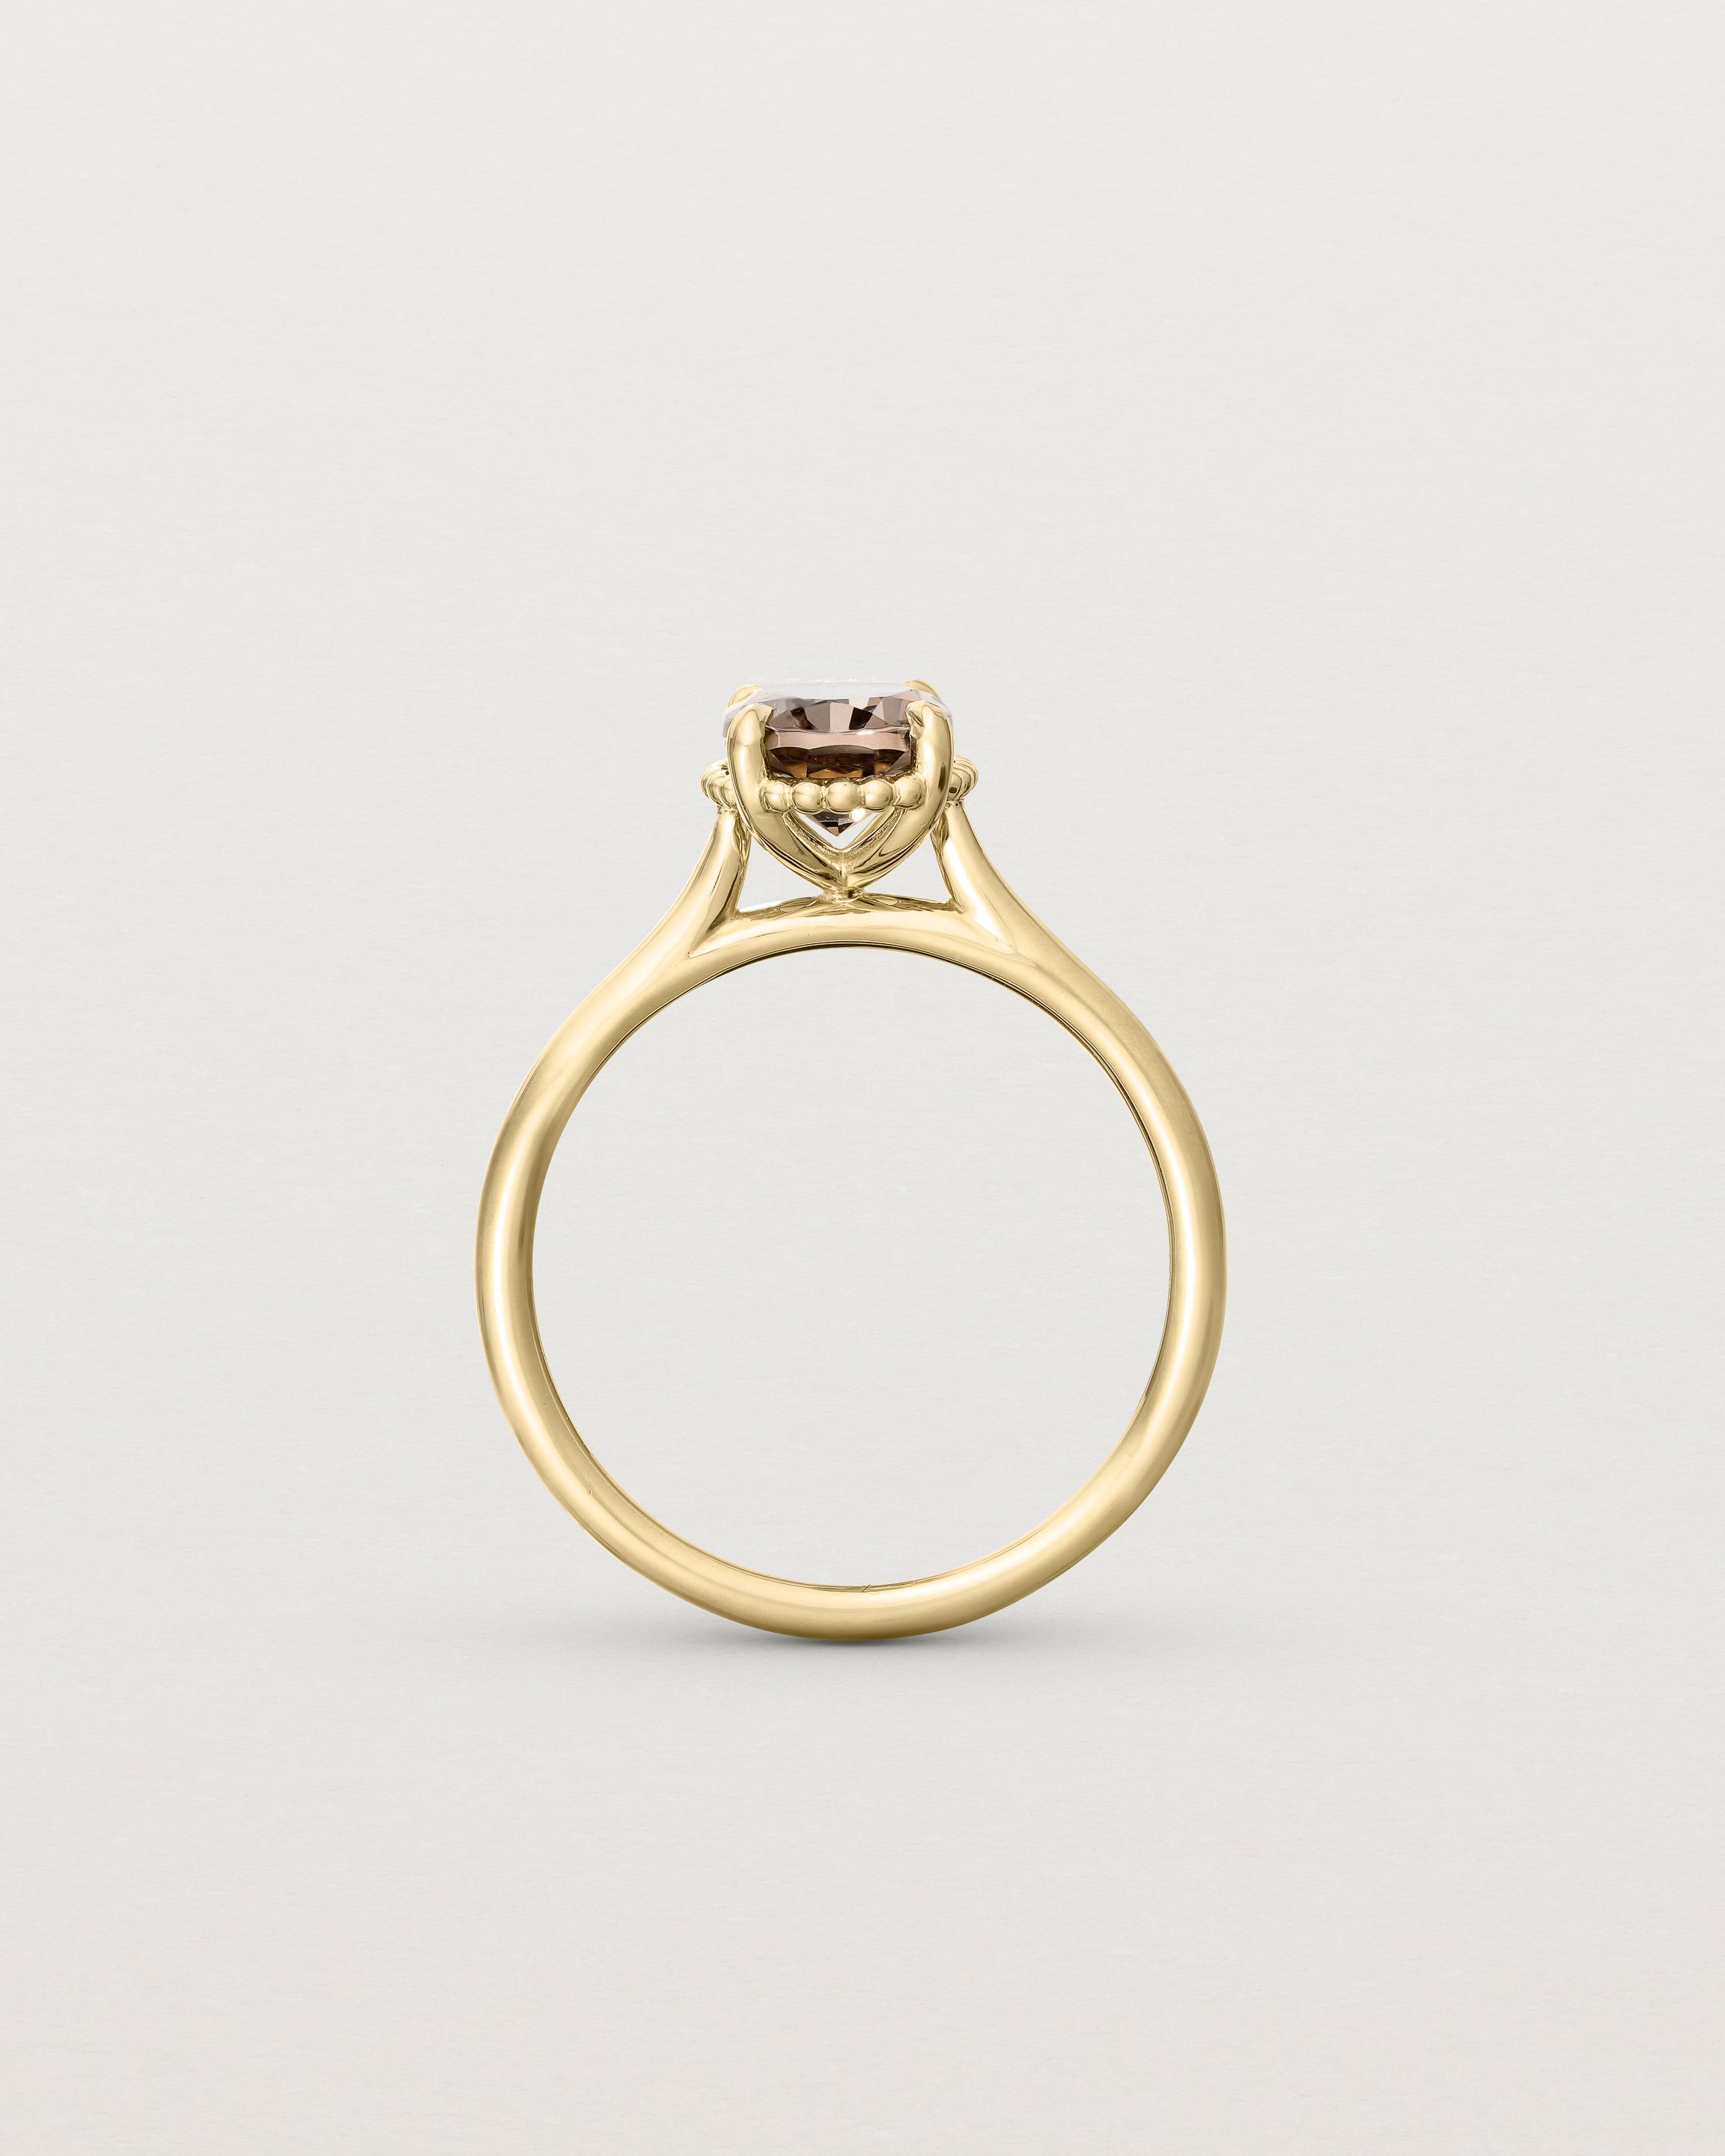 Standing view of the Thea Oval Solitaire | Smokey Quartz in yellow gold.